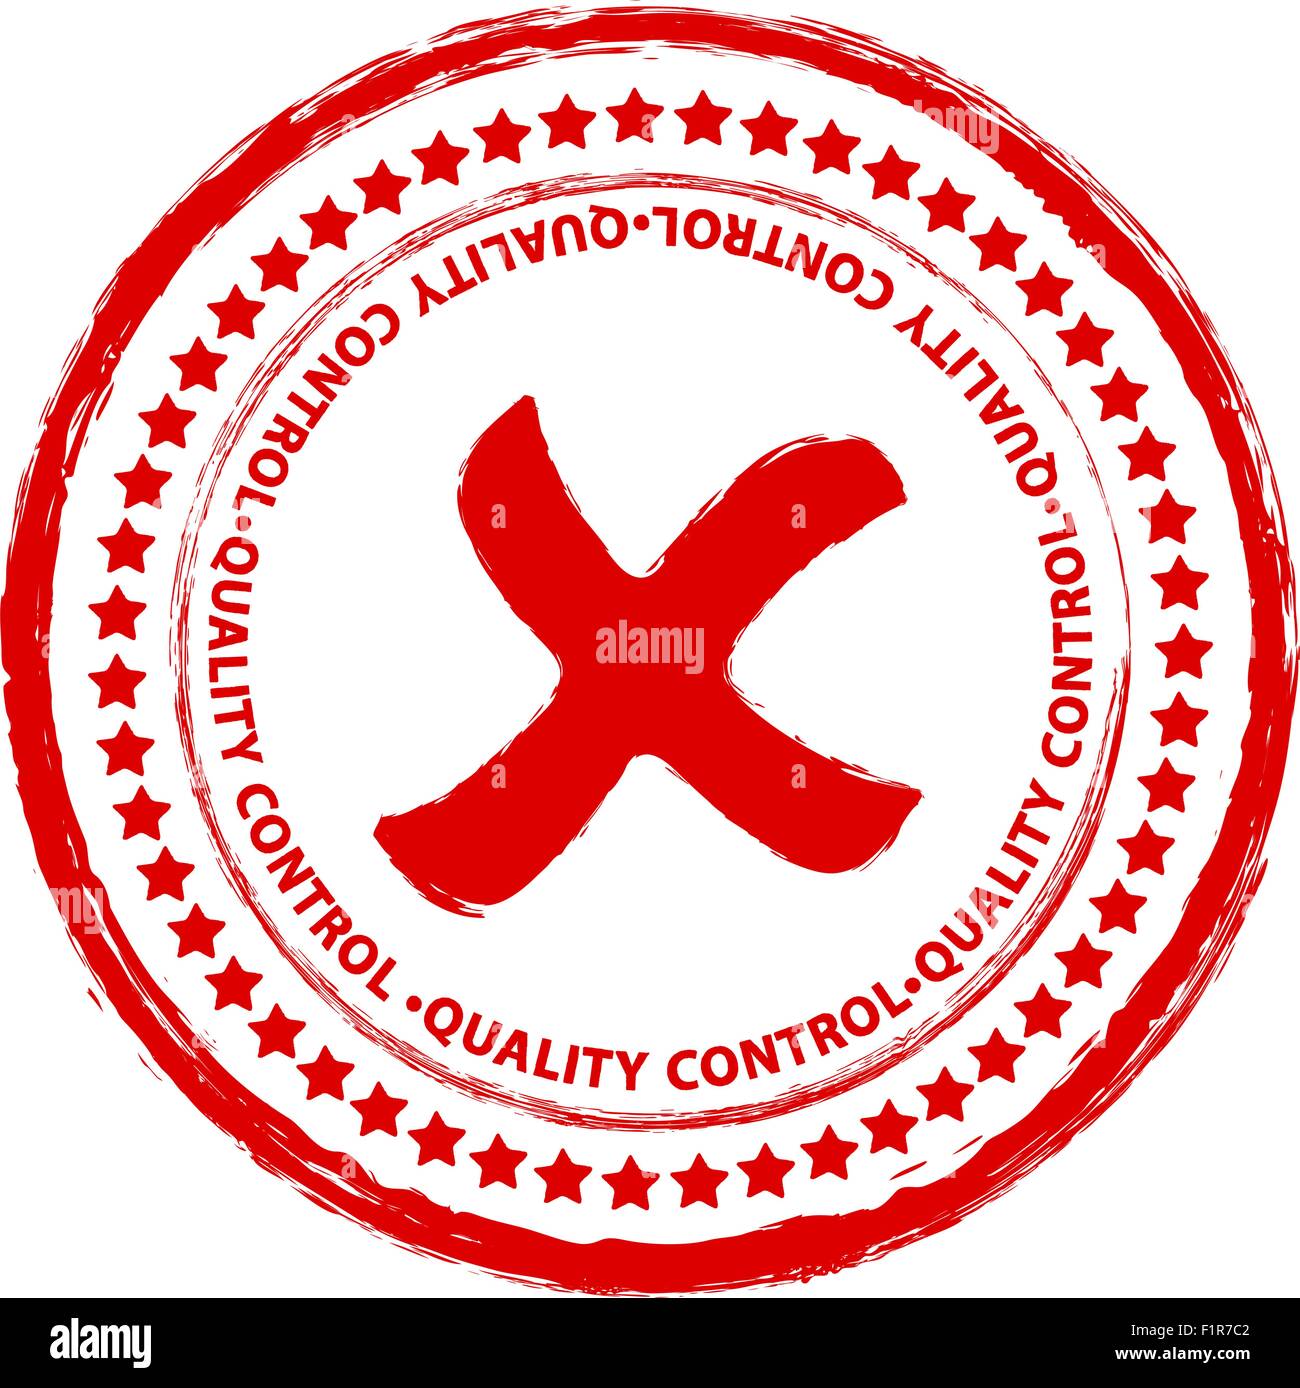 Red grunge rejected stamp on a white background. Vector illustration. Stock Vector